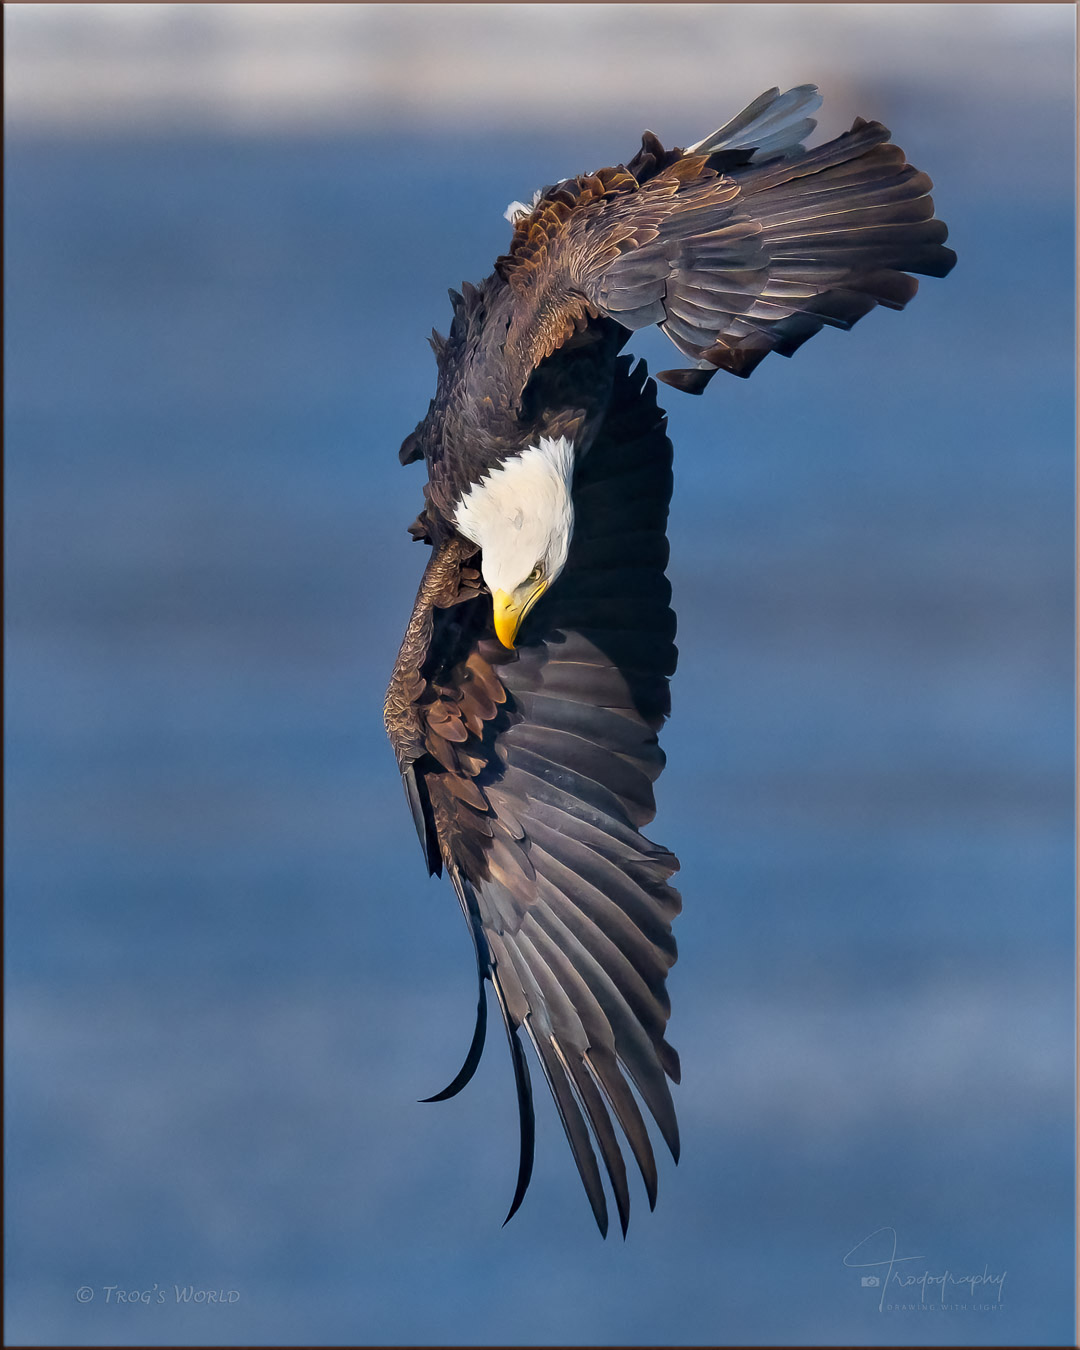 Bald Eagle diving for a fish